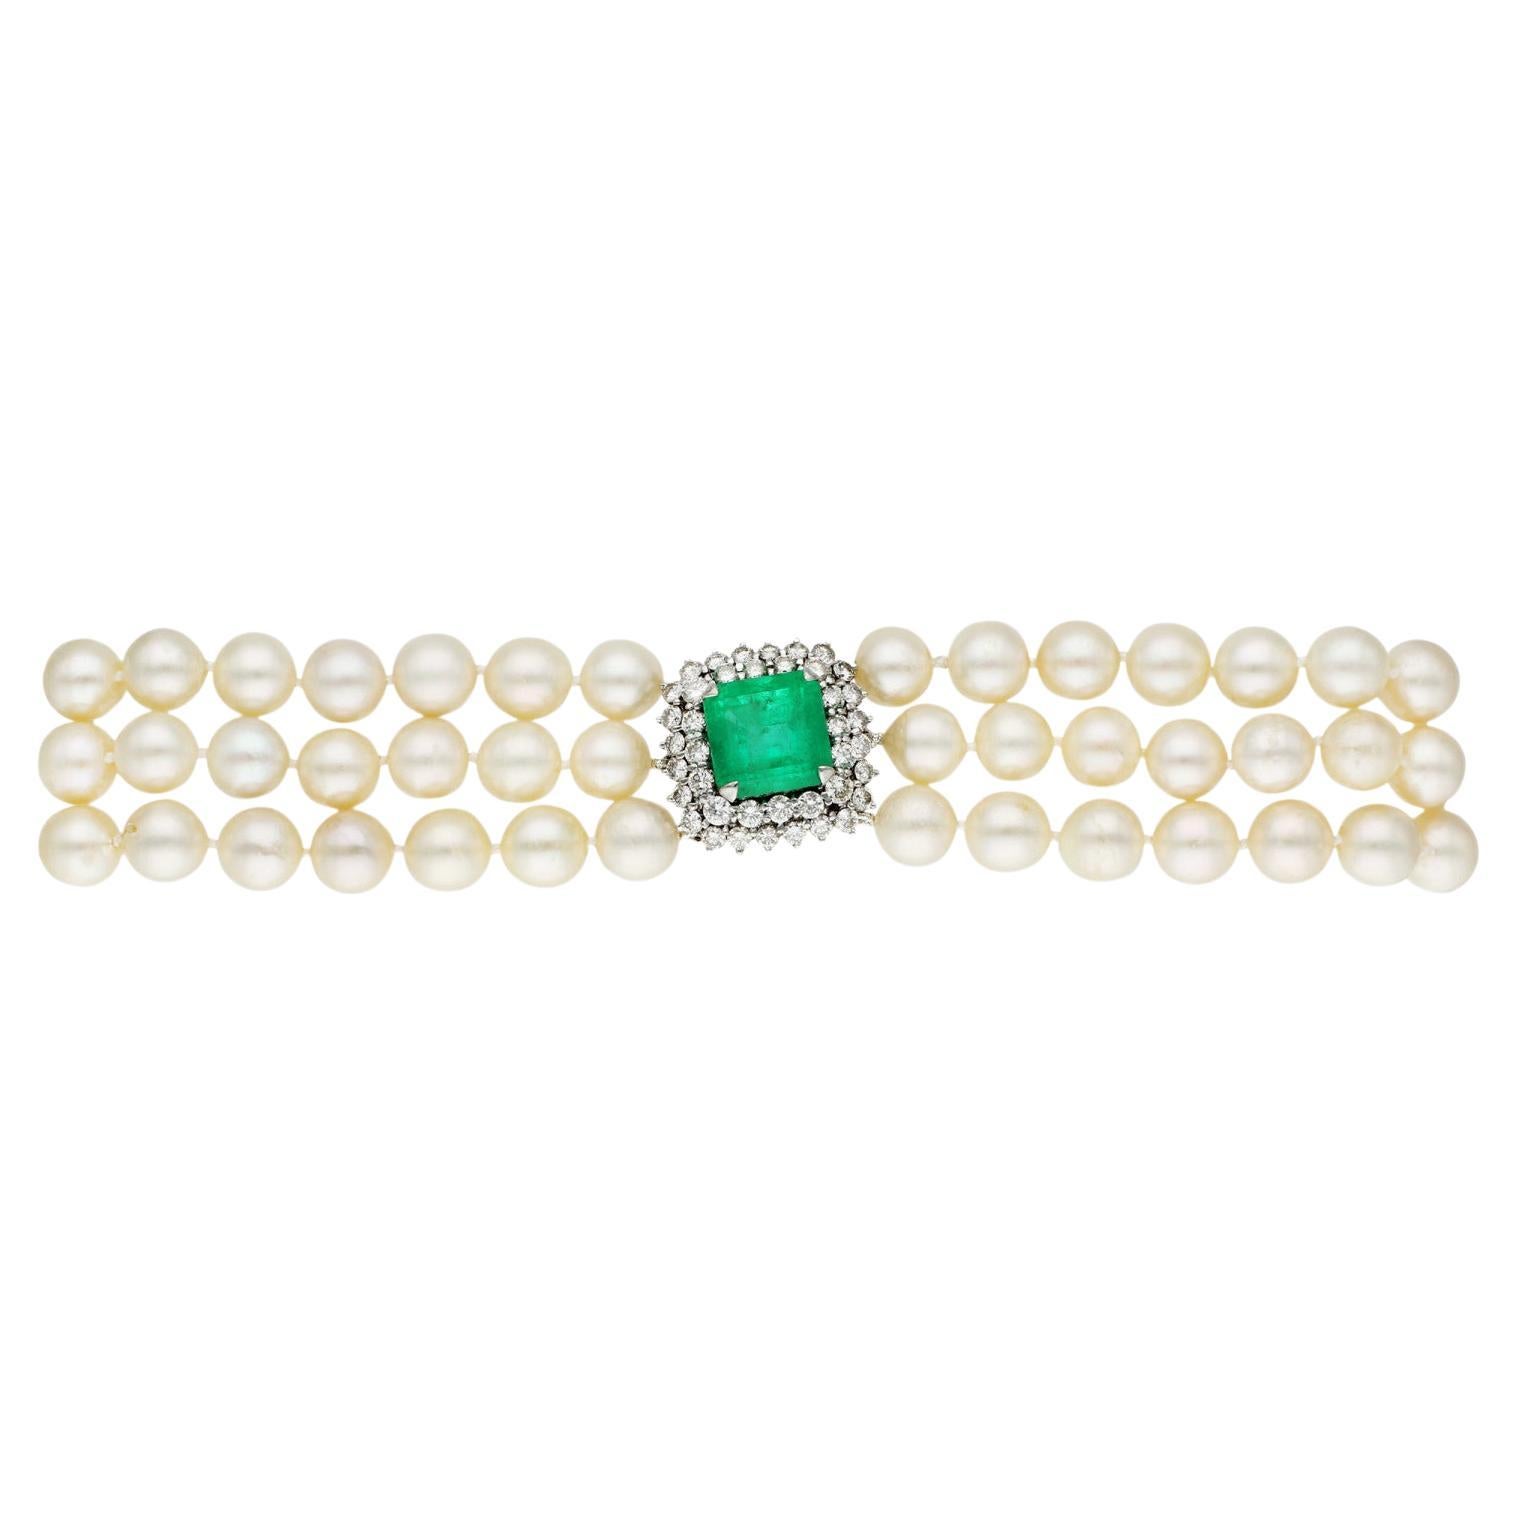 18ct White Gold 9ct Emerald, 2.8ct Diamond & Cultured Pearl Choker Necklace For Sale